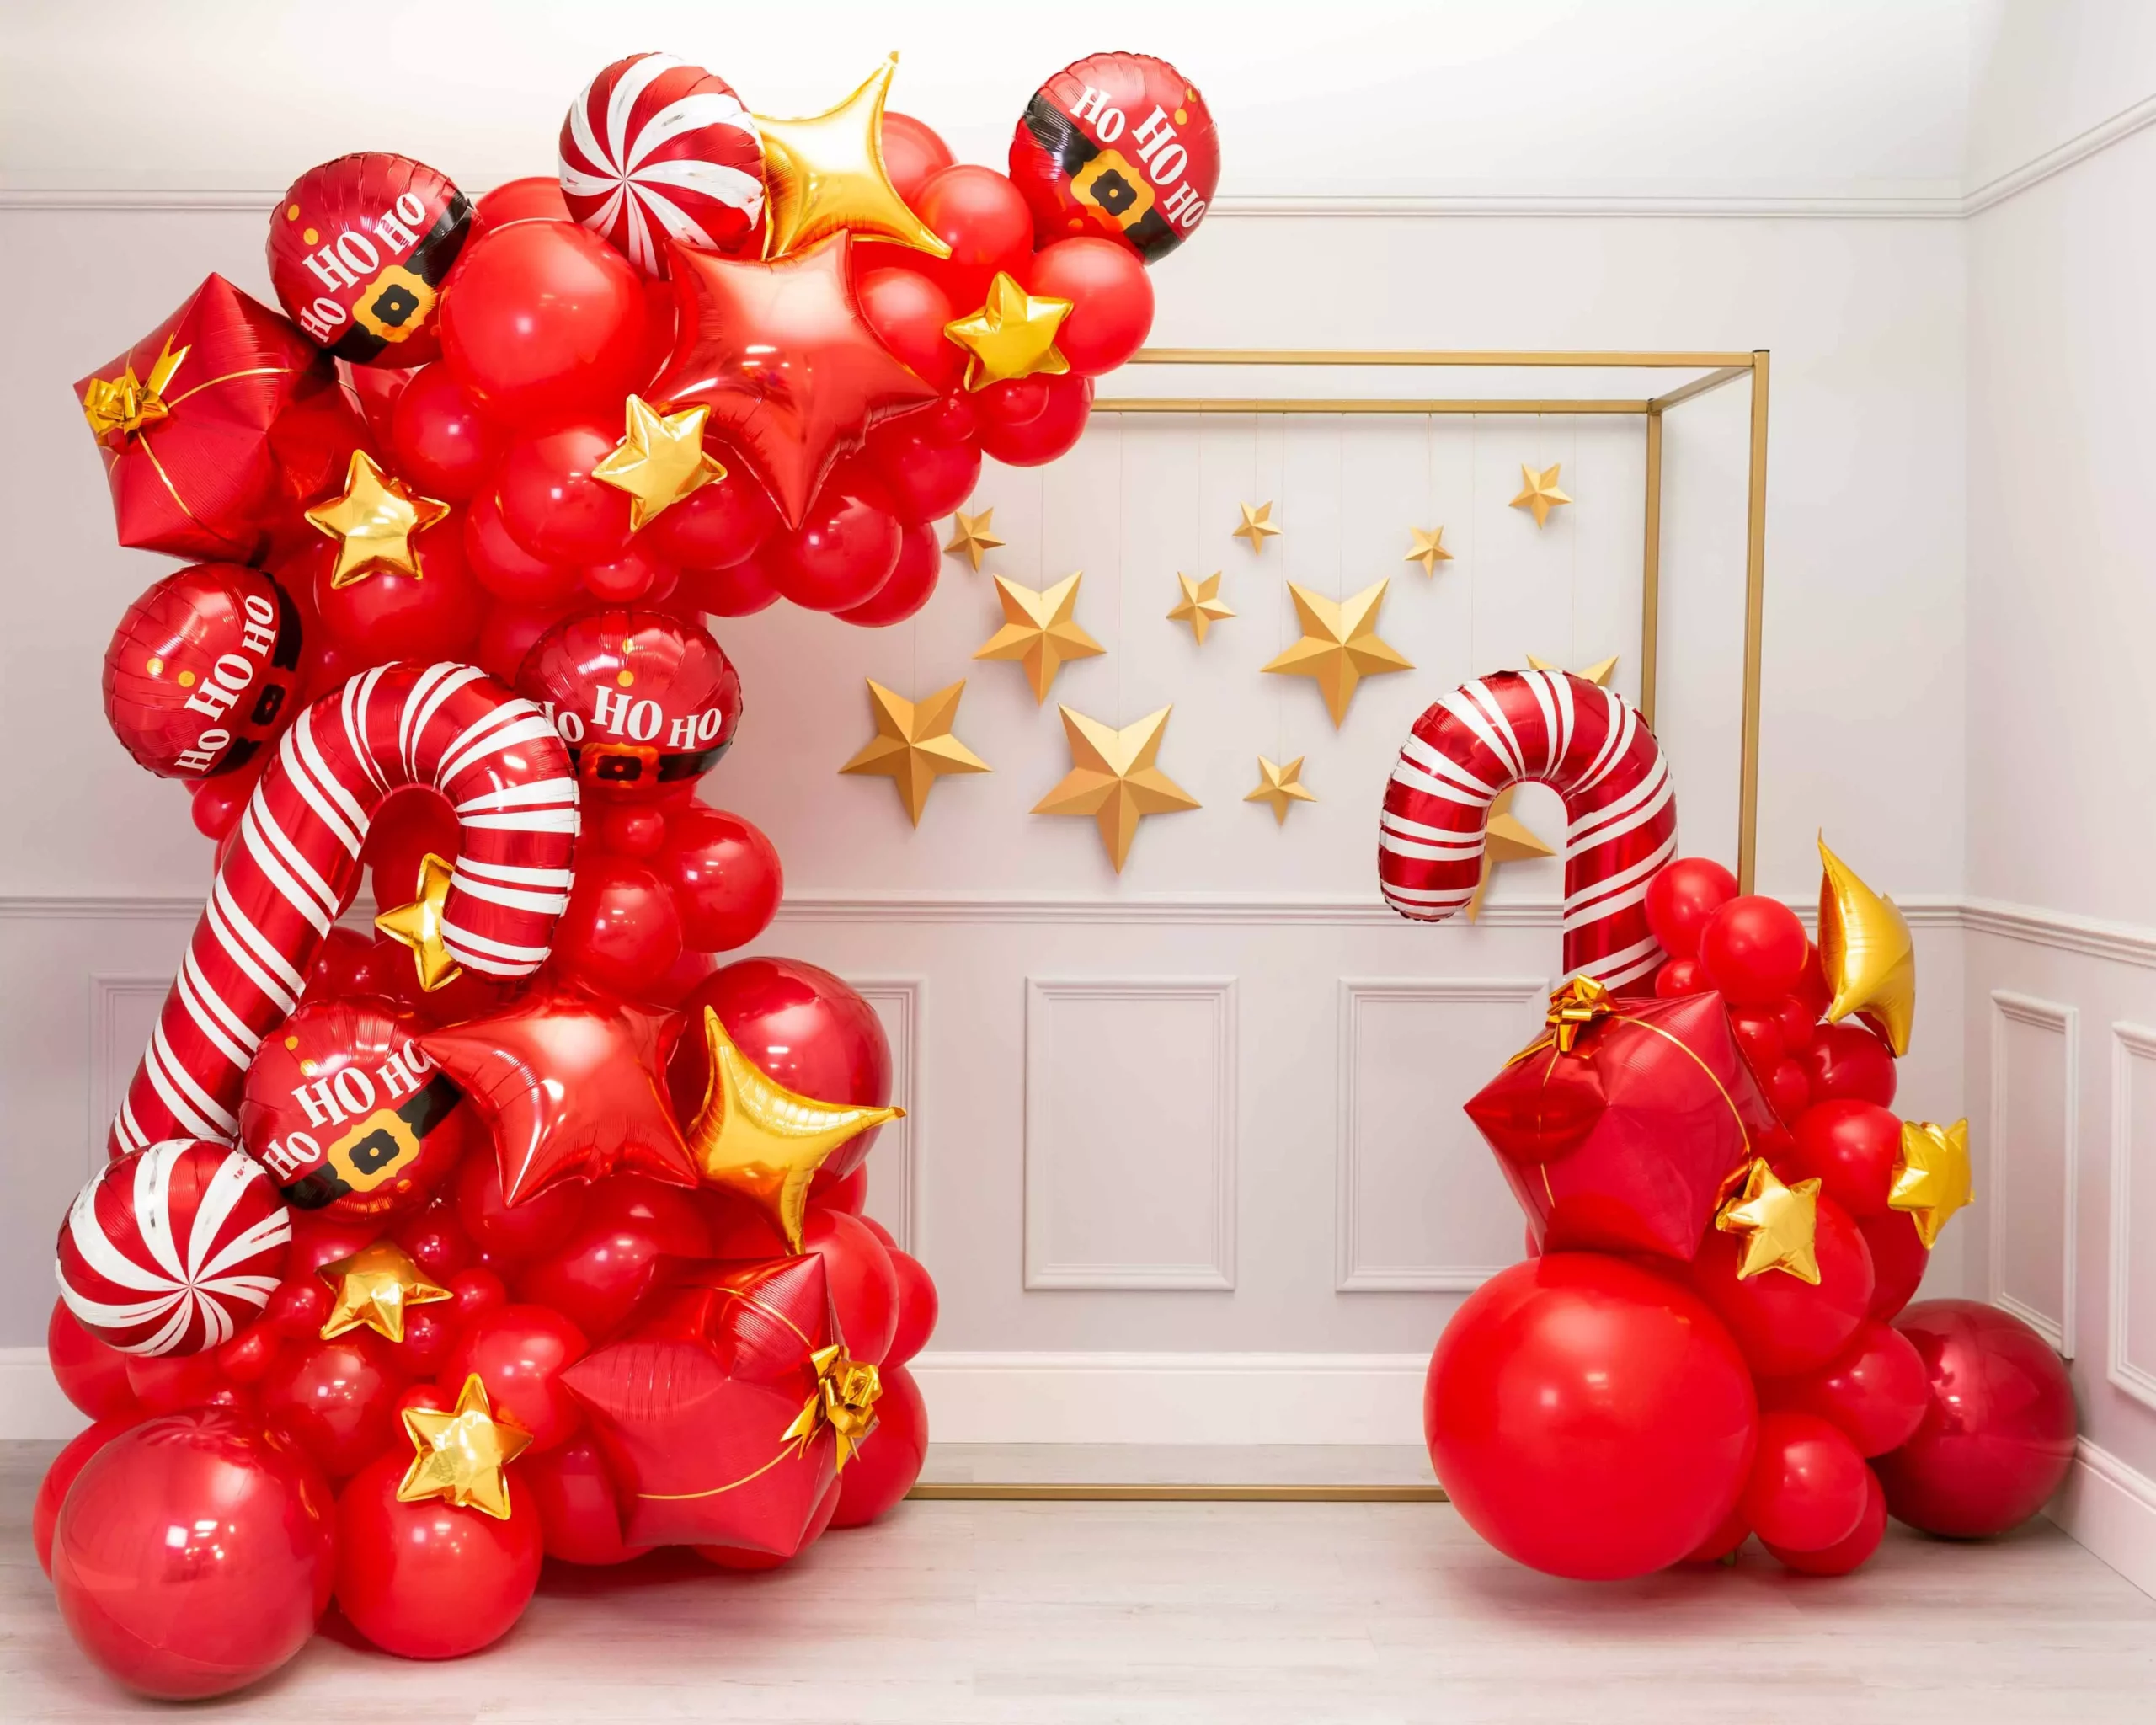 Balloon decoration for New Year